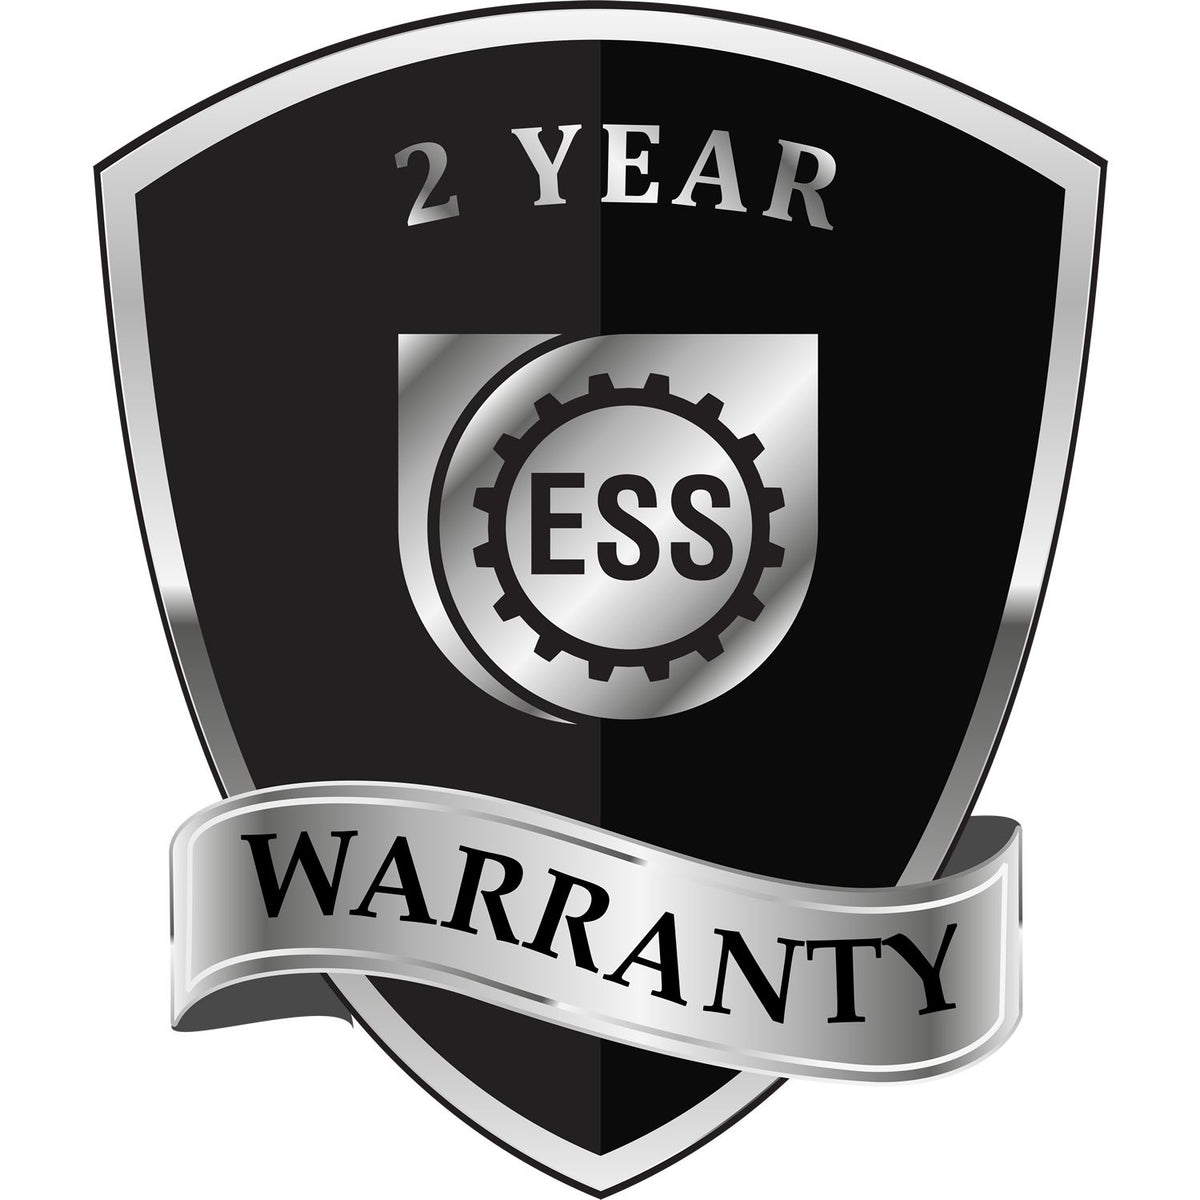 A badge or emblem showing a warranty icon for the State of Ohio Extended Long Reach Engineer Seal